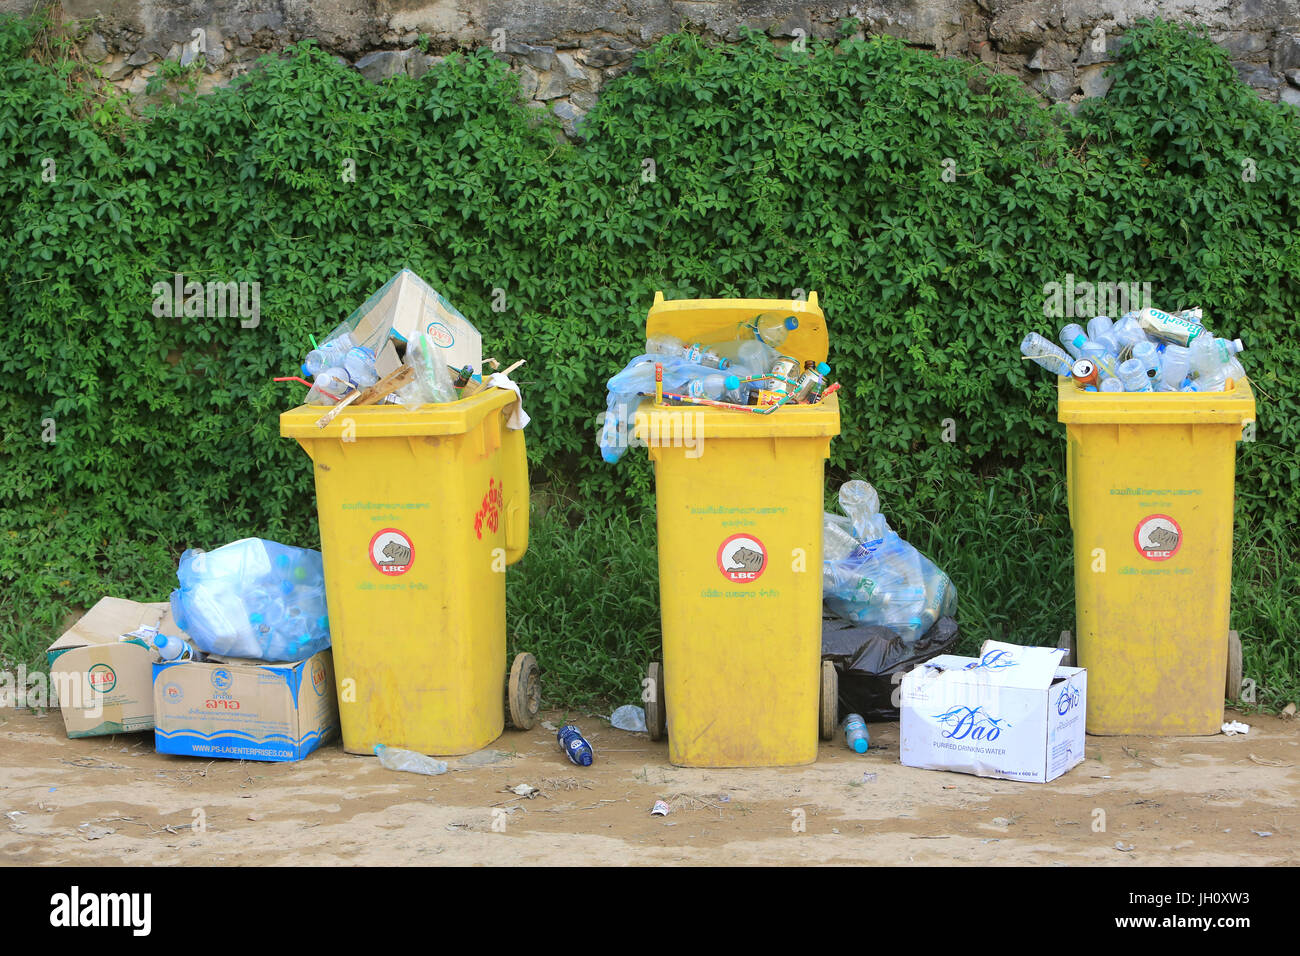 Waste bins for plastic water bottles. Laos. Stock Photo